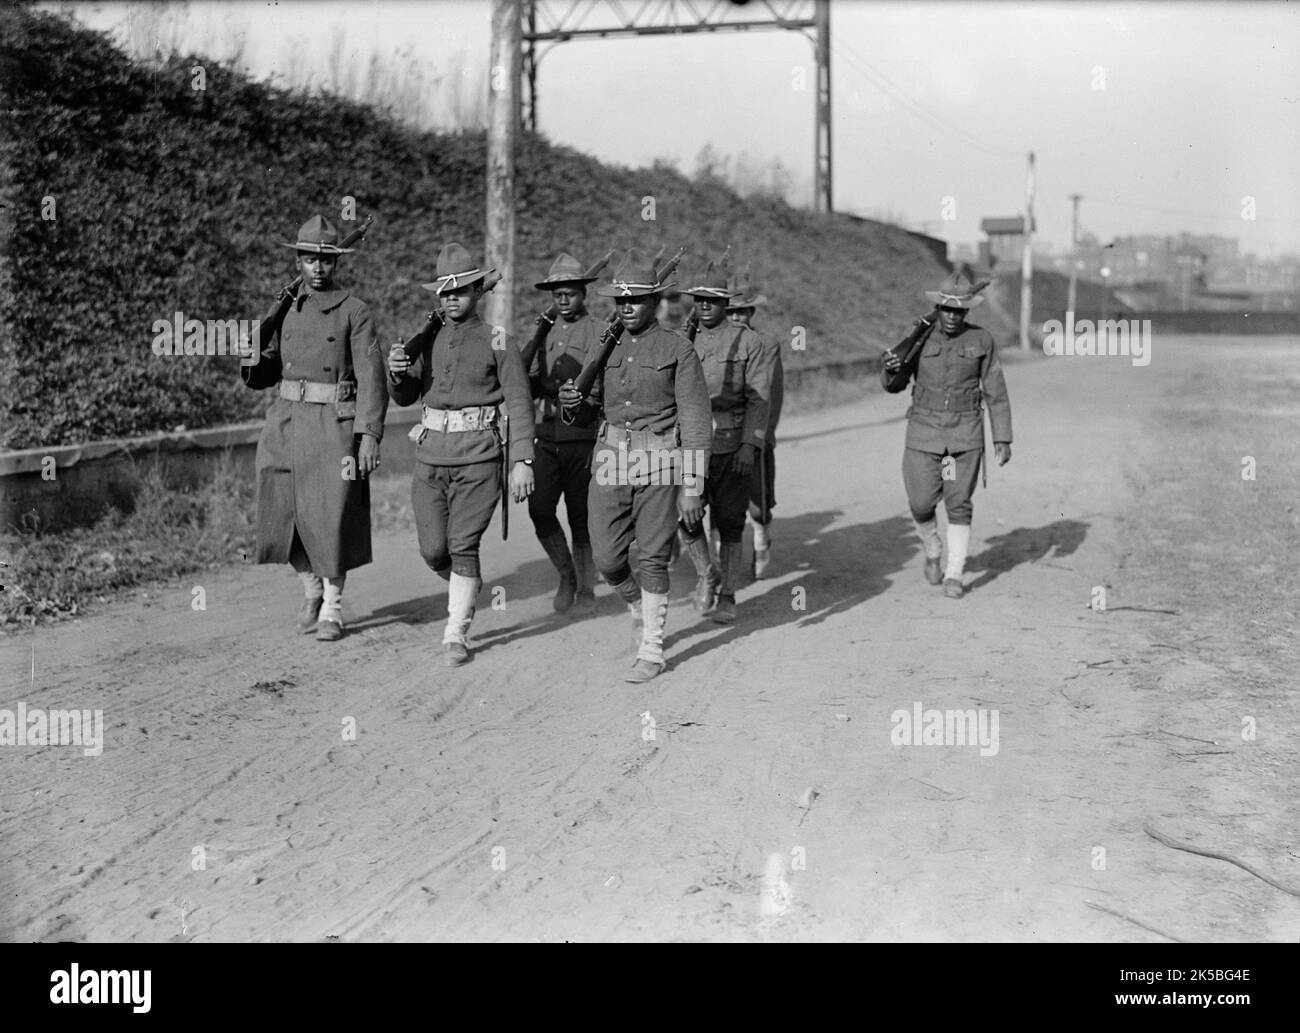 Army, U.S. Colored Soldiers, 1917. (African American soldiers). Stock Photo